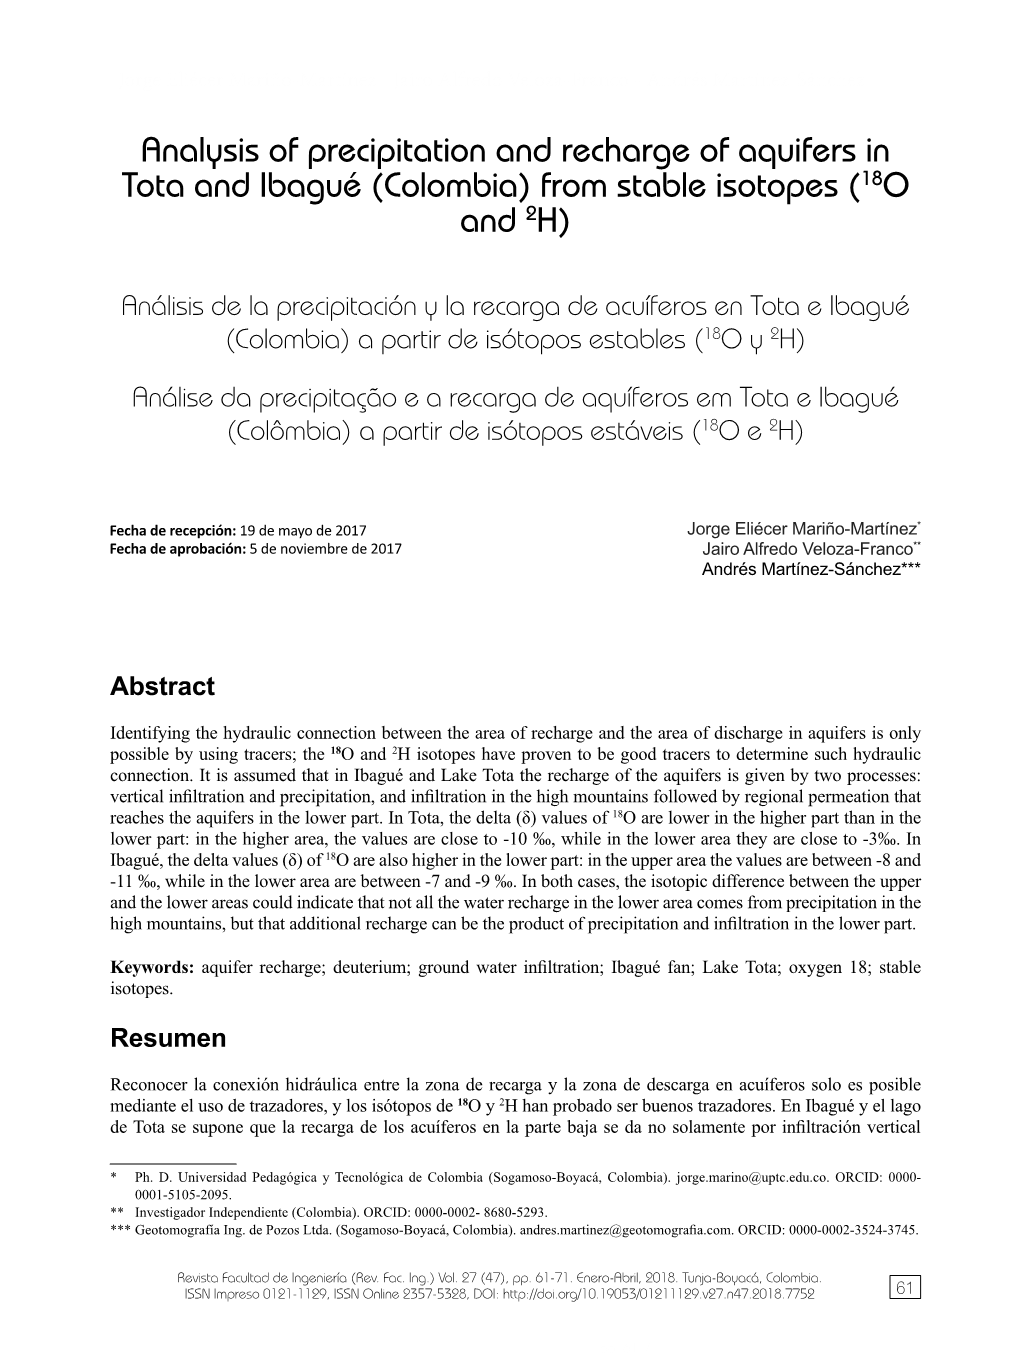 Analysis of Precipitation and Recharge of Aquifers in Tota and Ibagué (Colombia) from Stable Isotopes (18O and 2H)